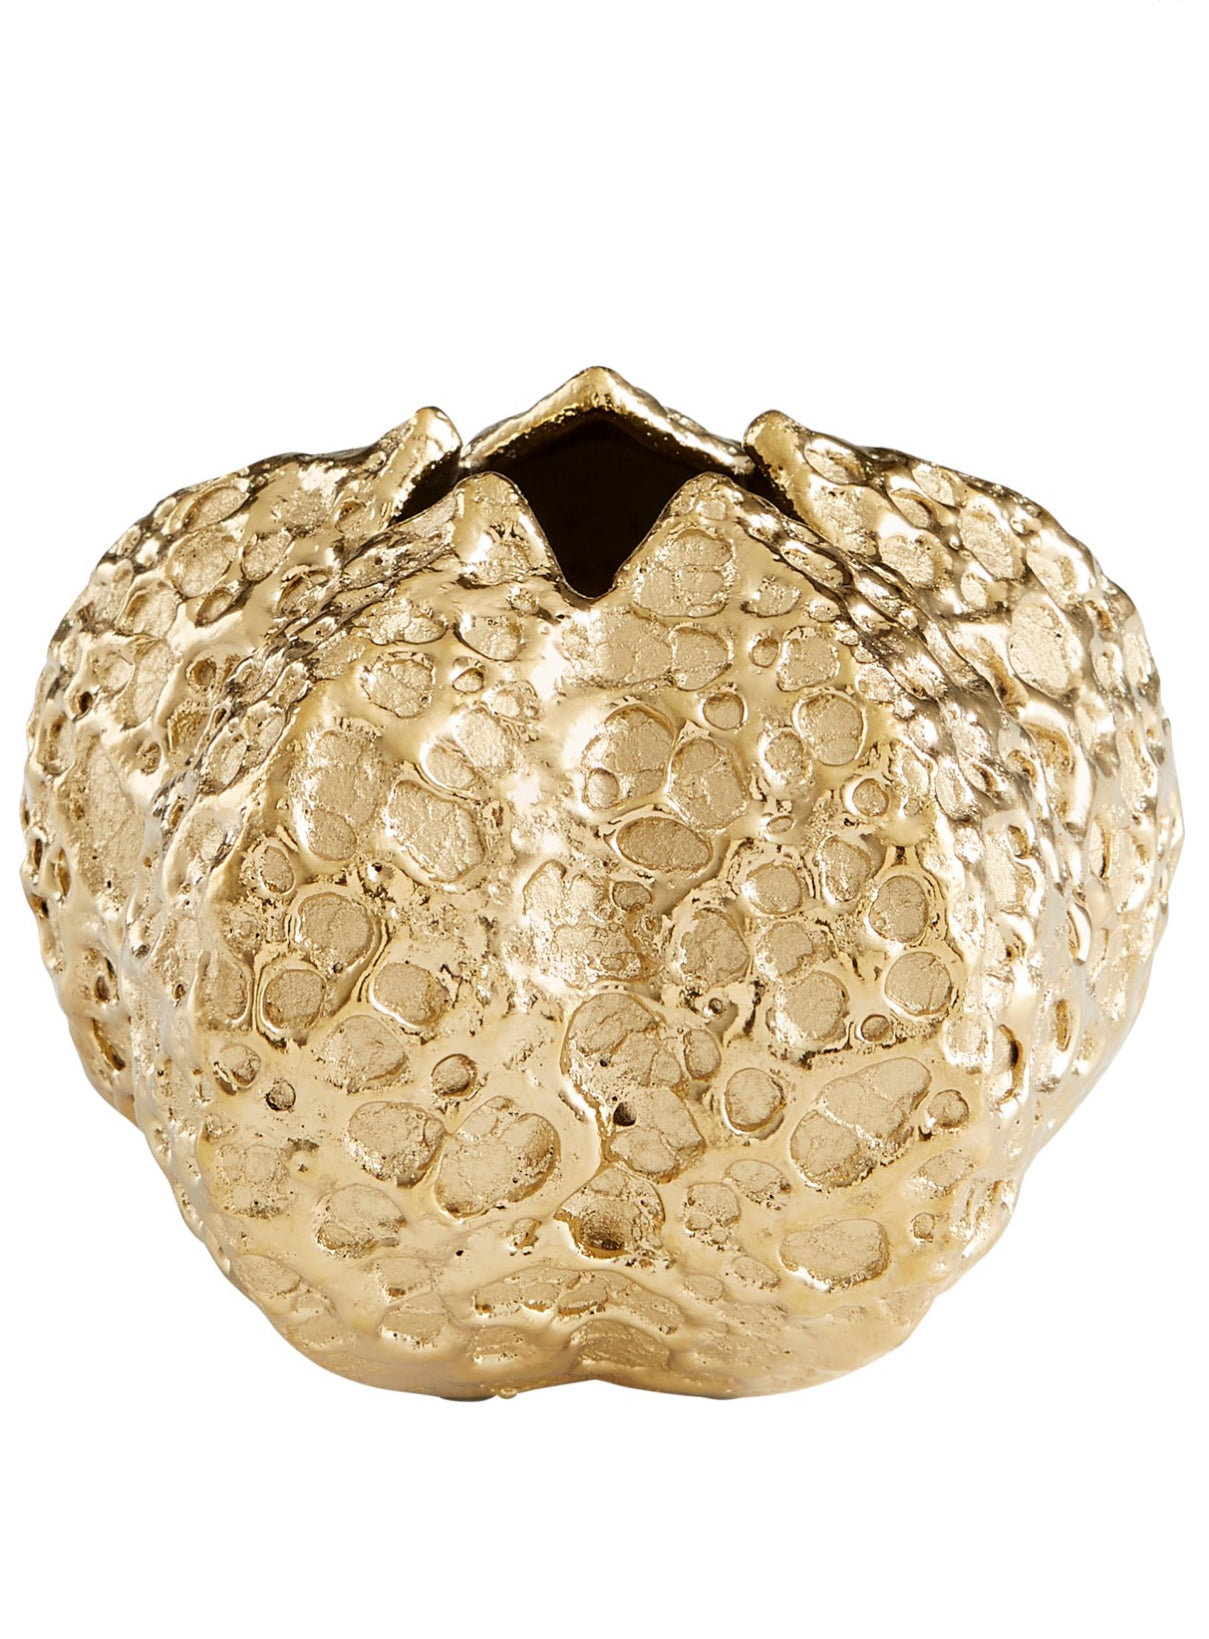  This abstract accent vase features a hammered metal form, coated in a shimmering gold finish. Perfect for any tabletop ensemble with ambitious elegance as the foundation for style and design. Store your floral arrangements in this vessel to display in your home office, bathroom, living room, or bedroom. This vase is also great for commercial or hospitality applications for added luxury in common areas and lobbies.  Dimensions: H 7.25 x Diameter 5